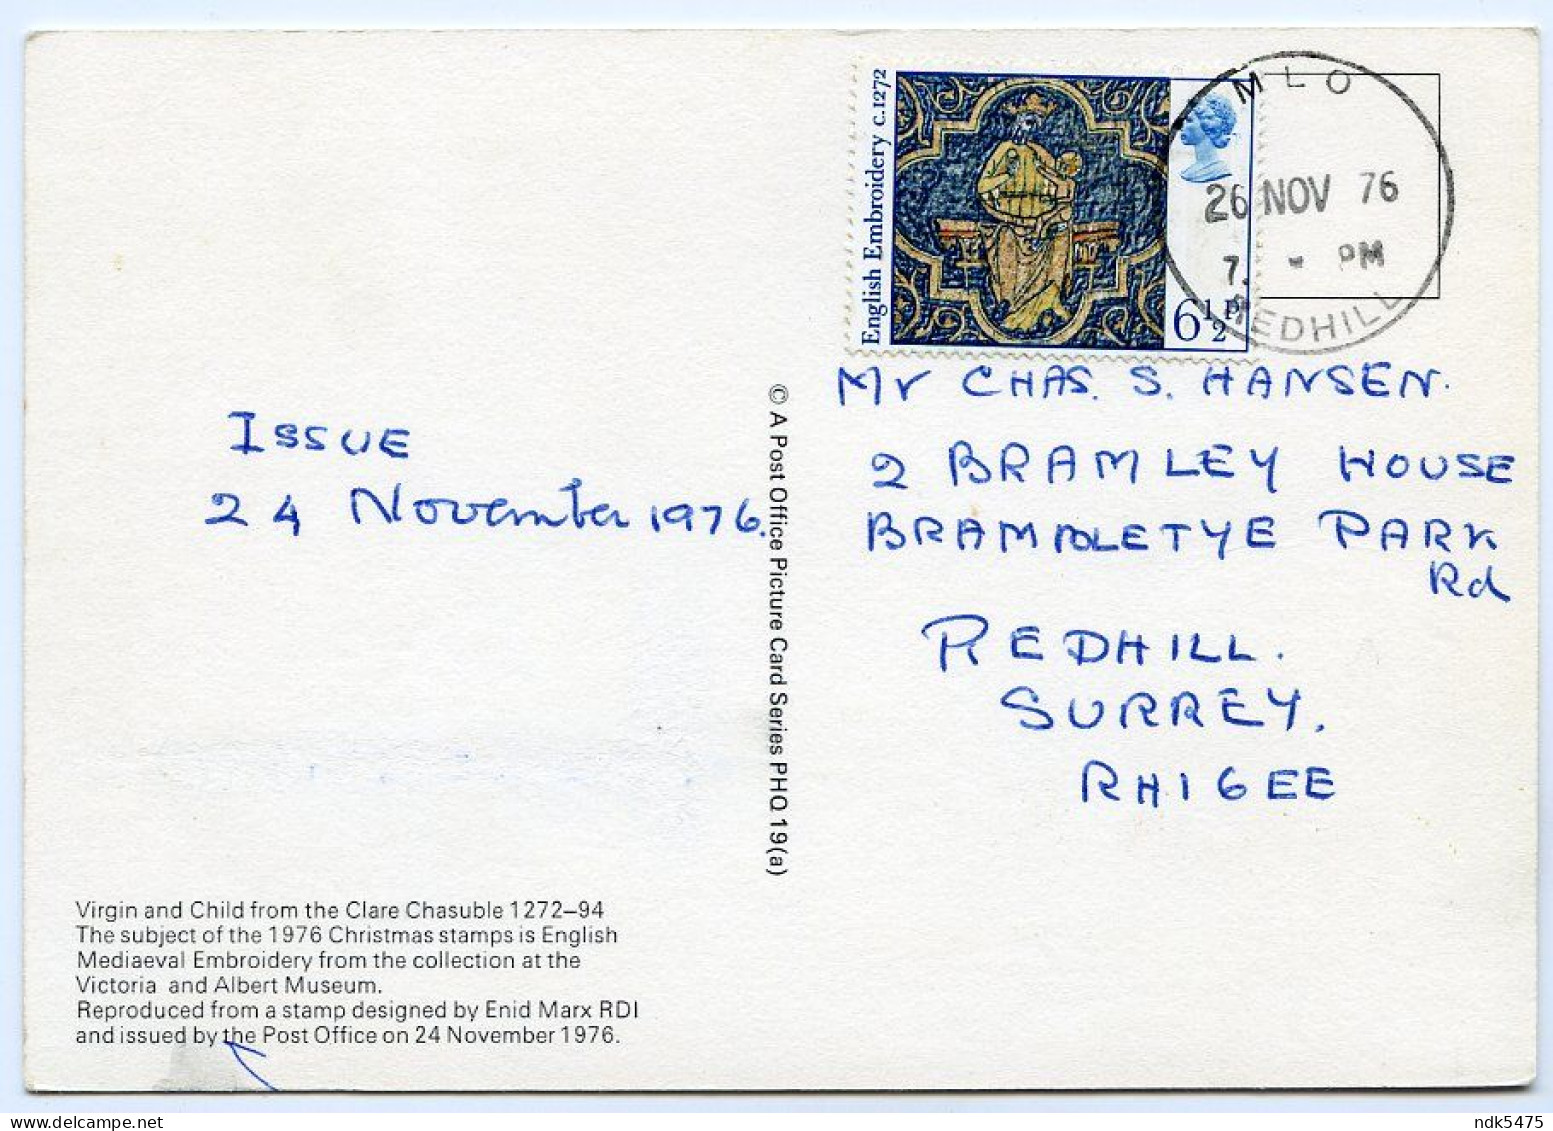 POSTMARK : MLO REDHILL, 1976 / VICTORIA AND ALBERT MUSEUM PHQ - VIRGIN AND CHILD  (10 X 15cms Approx.) - PHQ-Cards